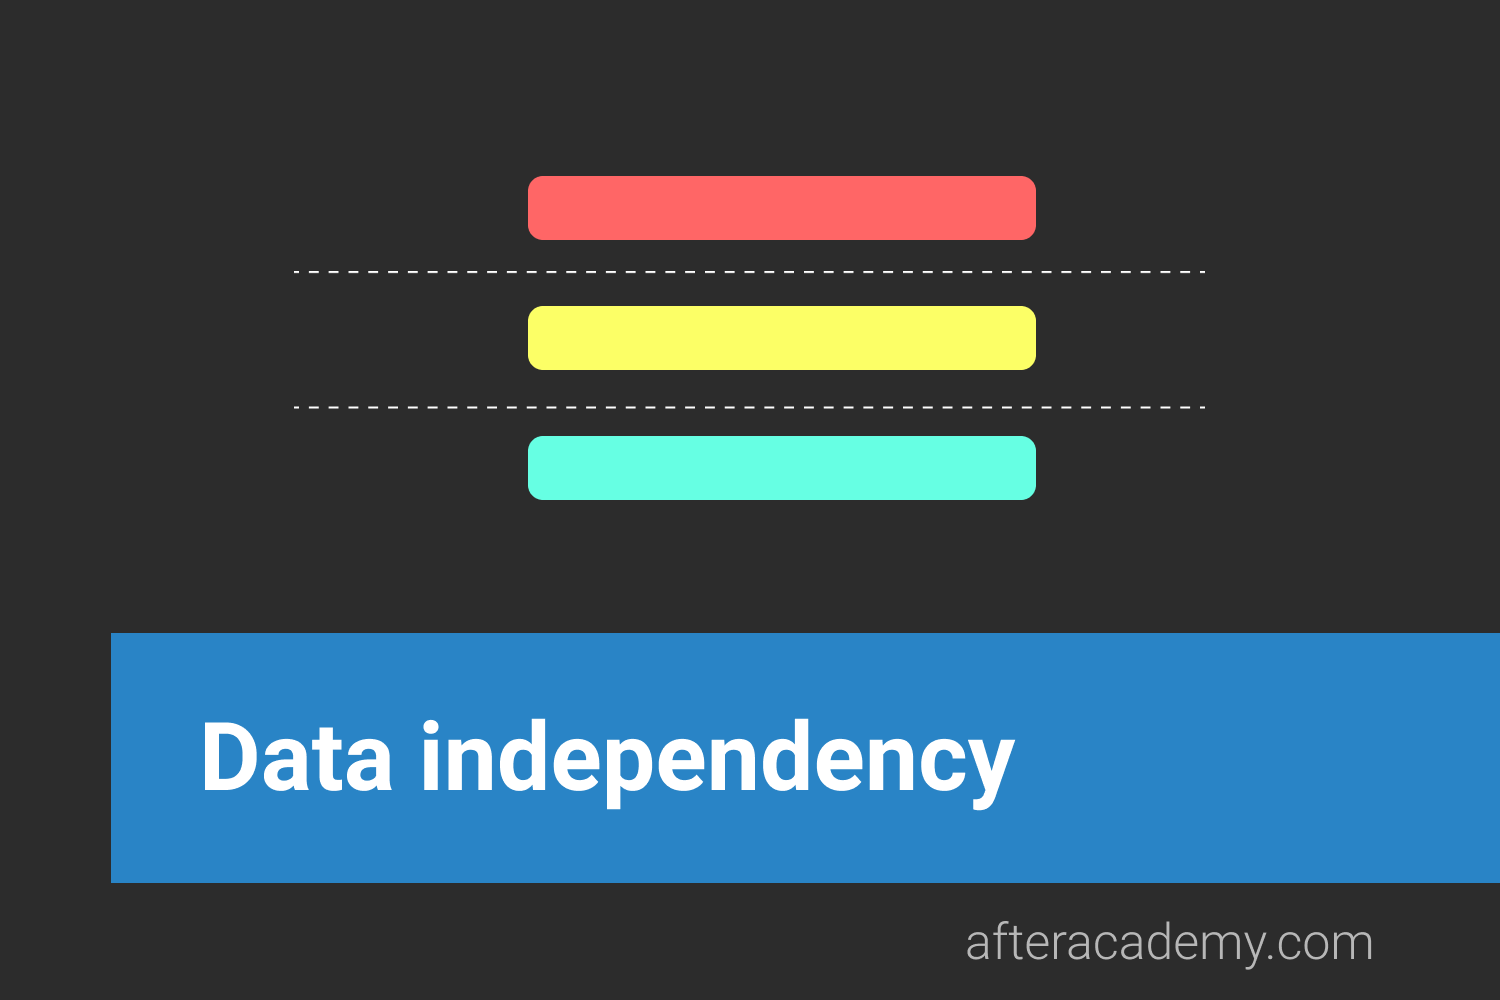 What is Data independency?